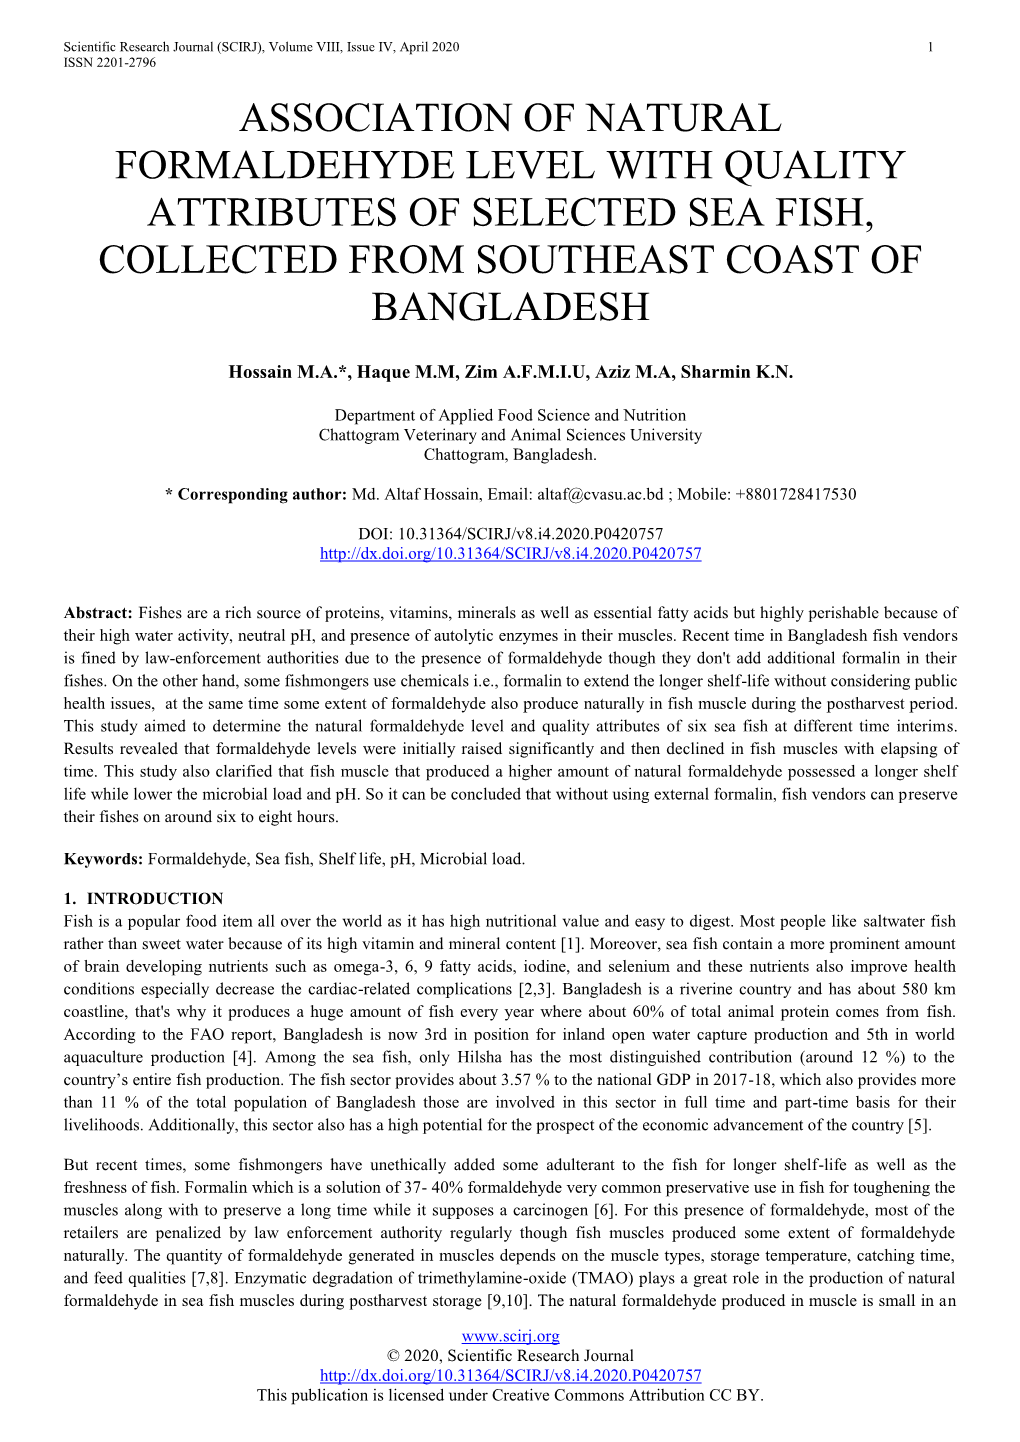 Association of Natural Formaldehyde Level with Quality Attributes of Selected Sea Fish, Collected from Southeast Coast of Bangladesh